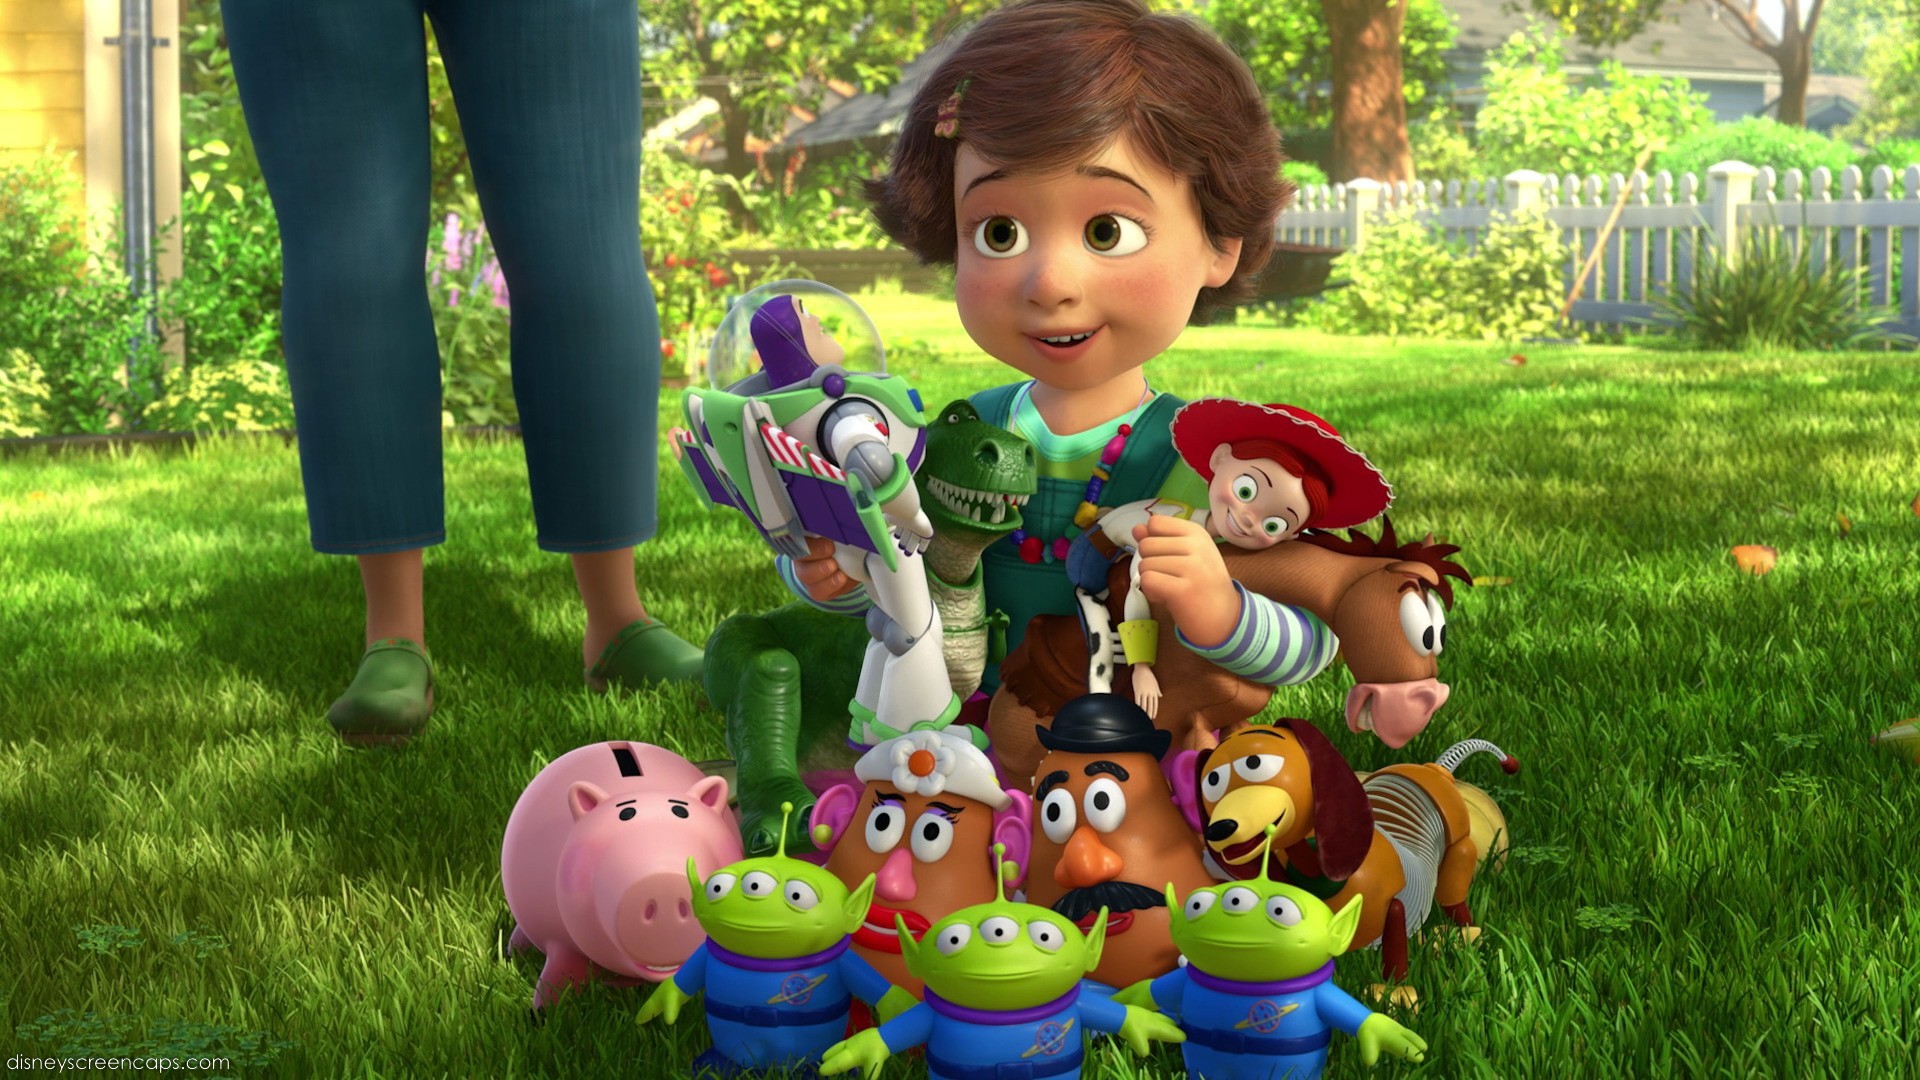 Image result for toy story 3